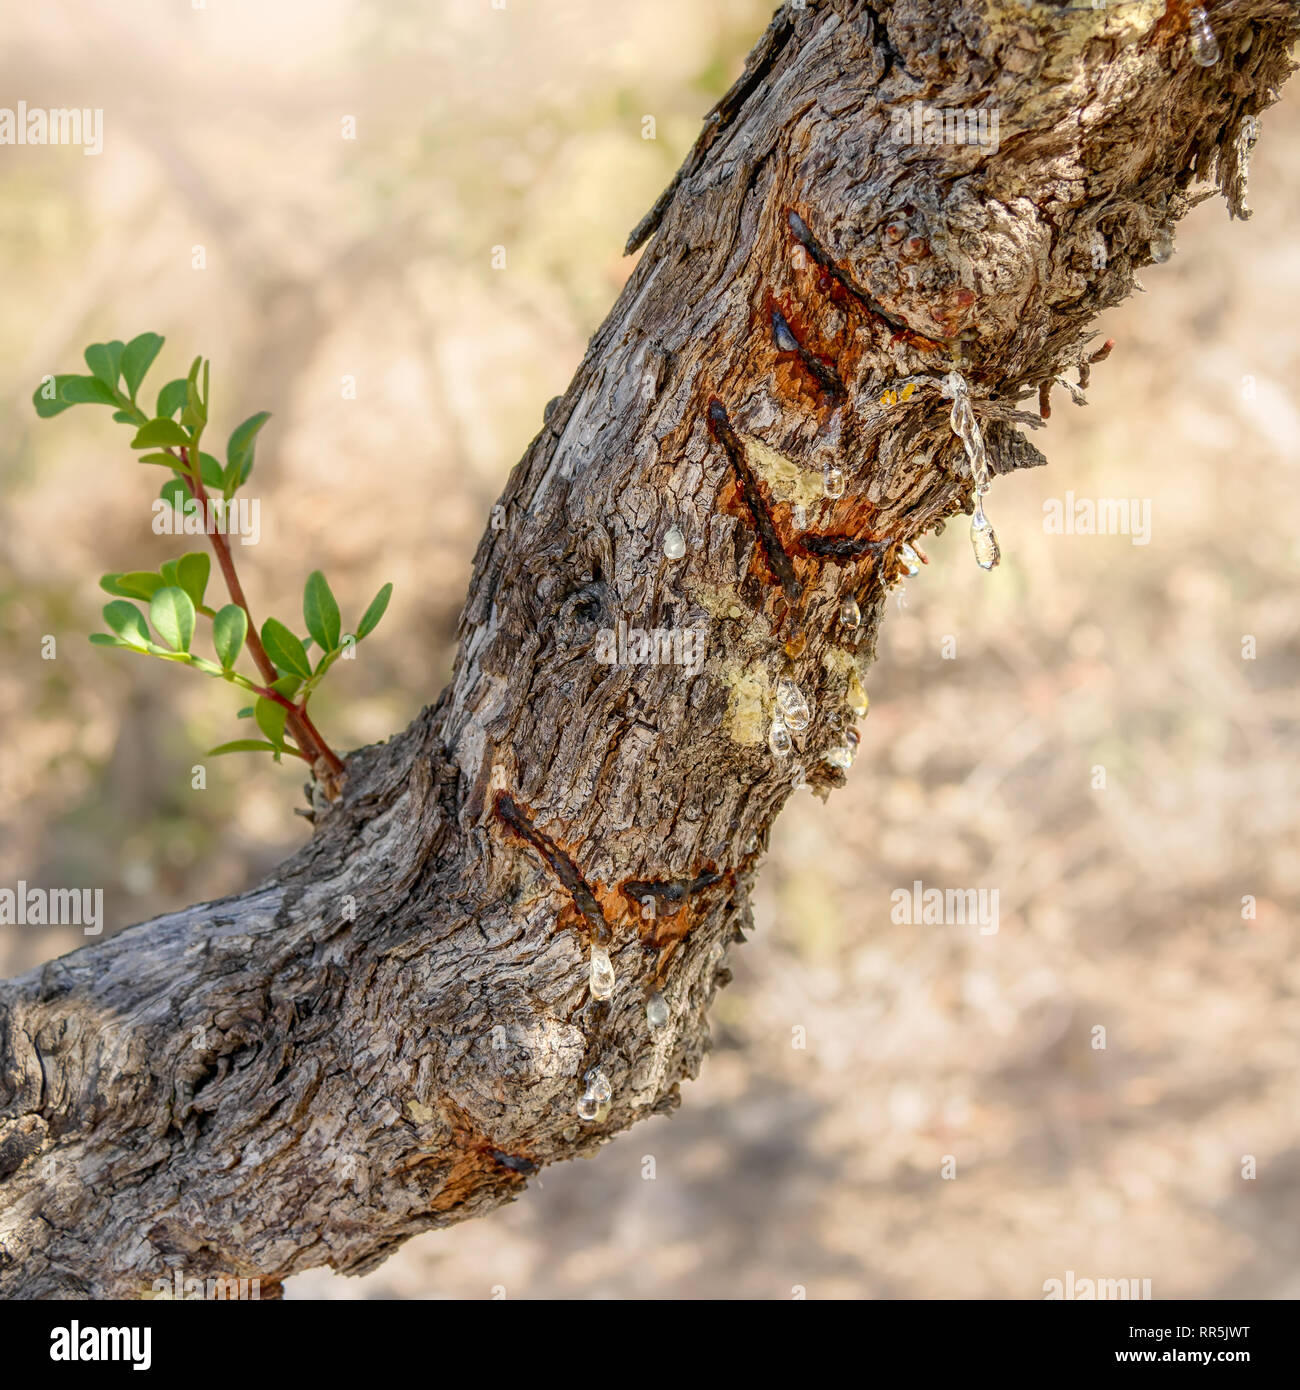 Resin on a Mastic tree, Pistacia lentiscus, with incisions in the bark to release the resin, clear drops hang from the branch, Chios, Greece Stock Photo